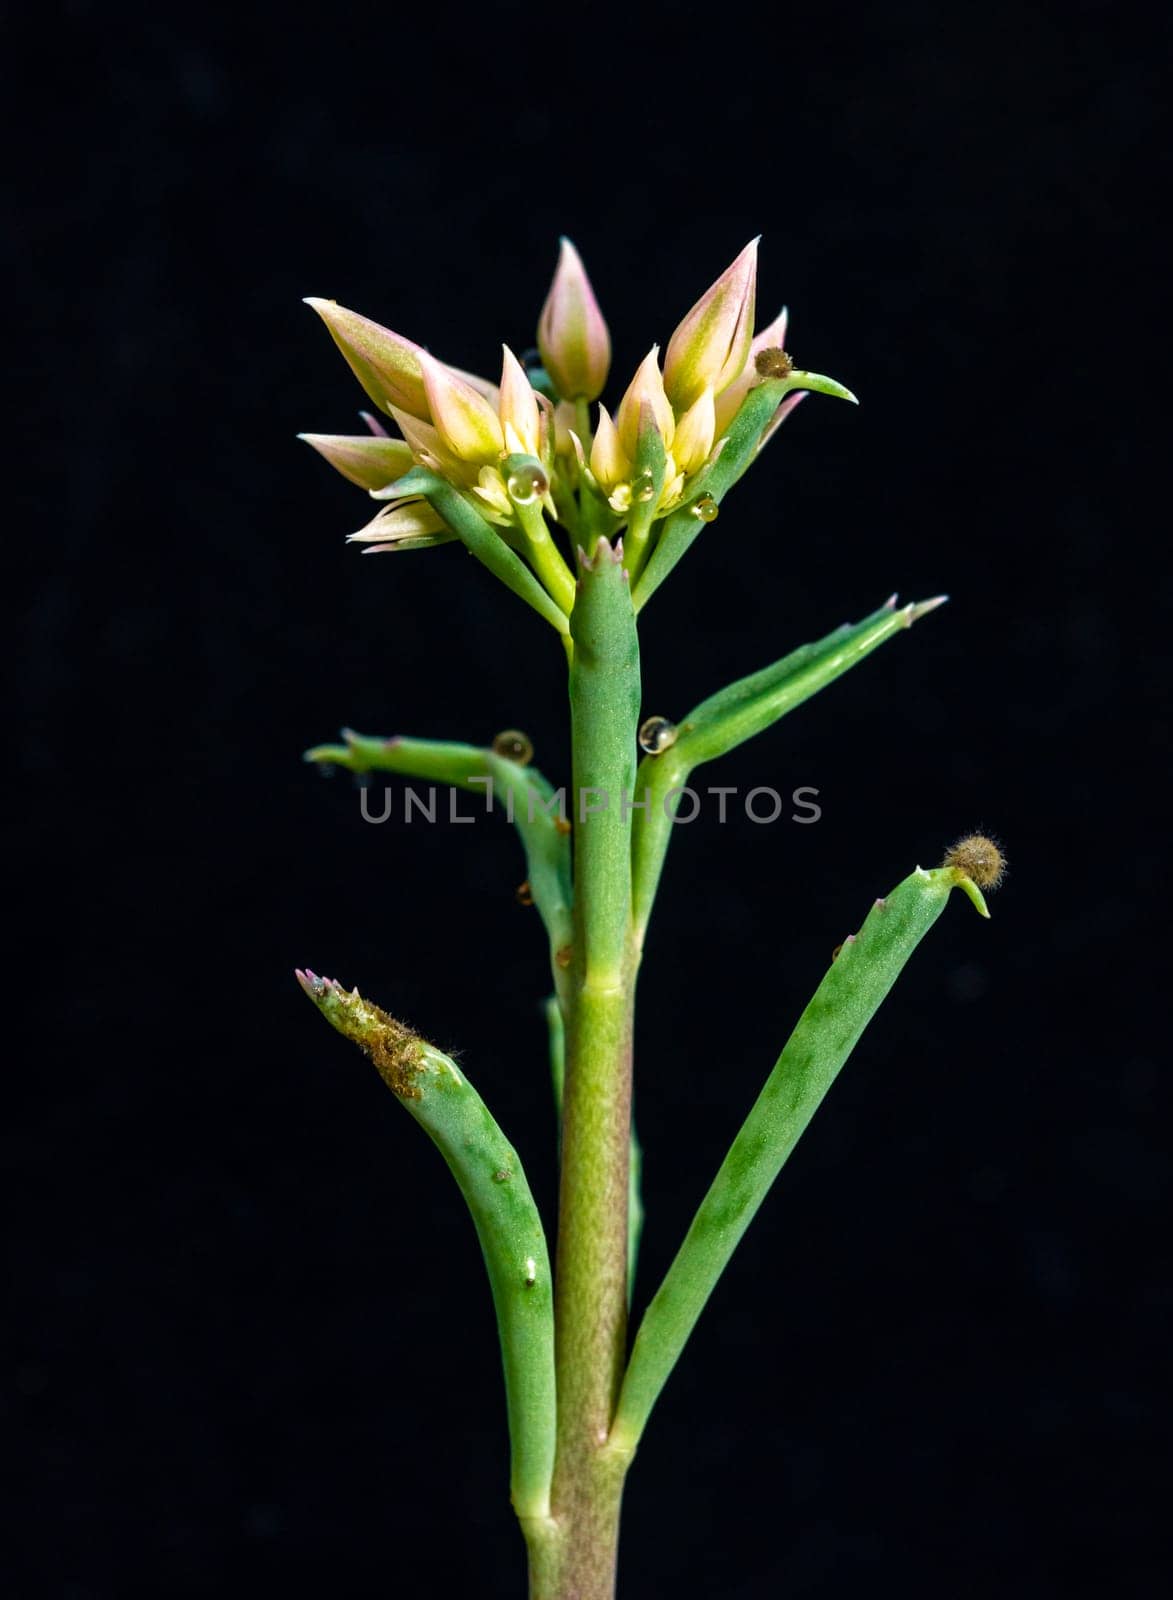 Kalanchoe sp. - inflorescence of a succulent plant on a black background by Hydrobiolog